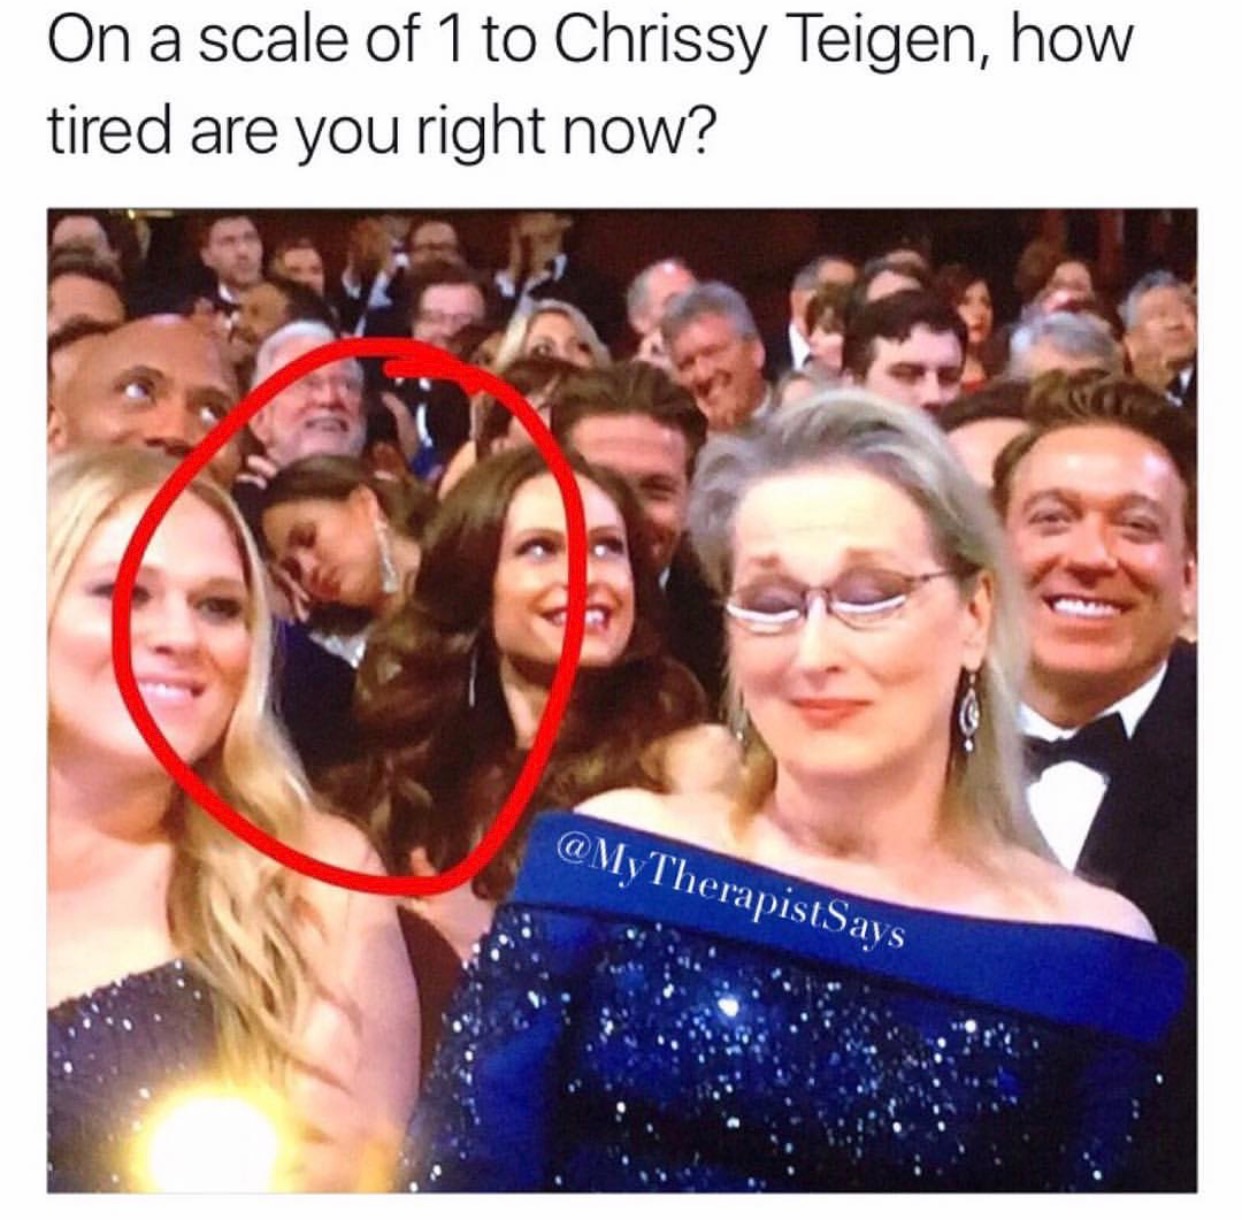 chrissy teigen meme - On a scale of 1 to Chrissy Teigen, how tired are you right now? Therapist Says